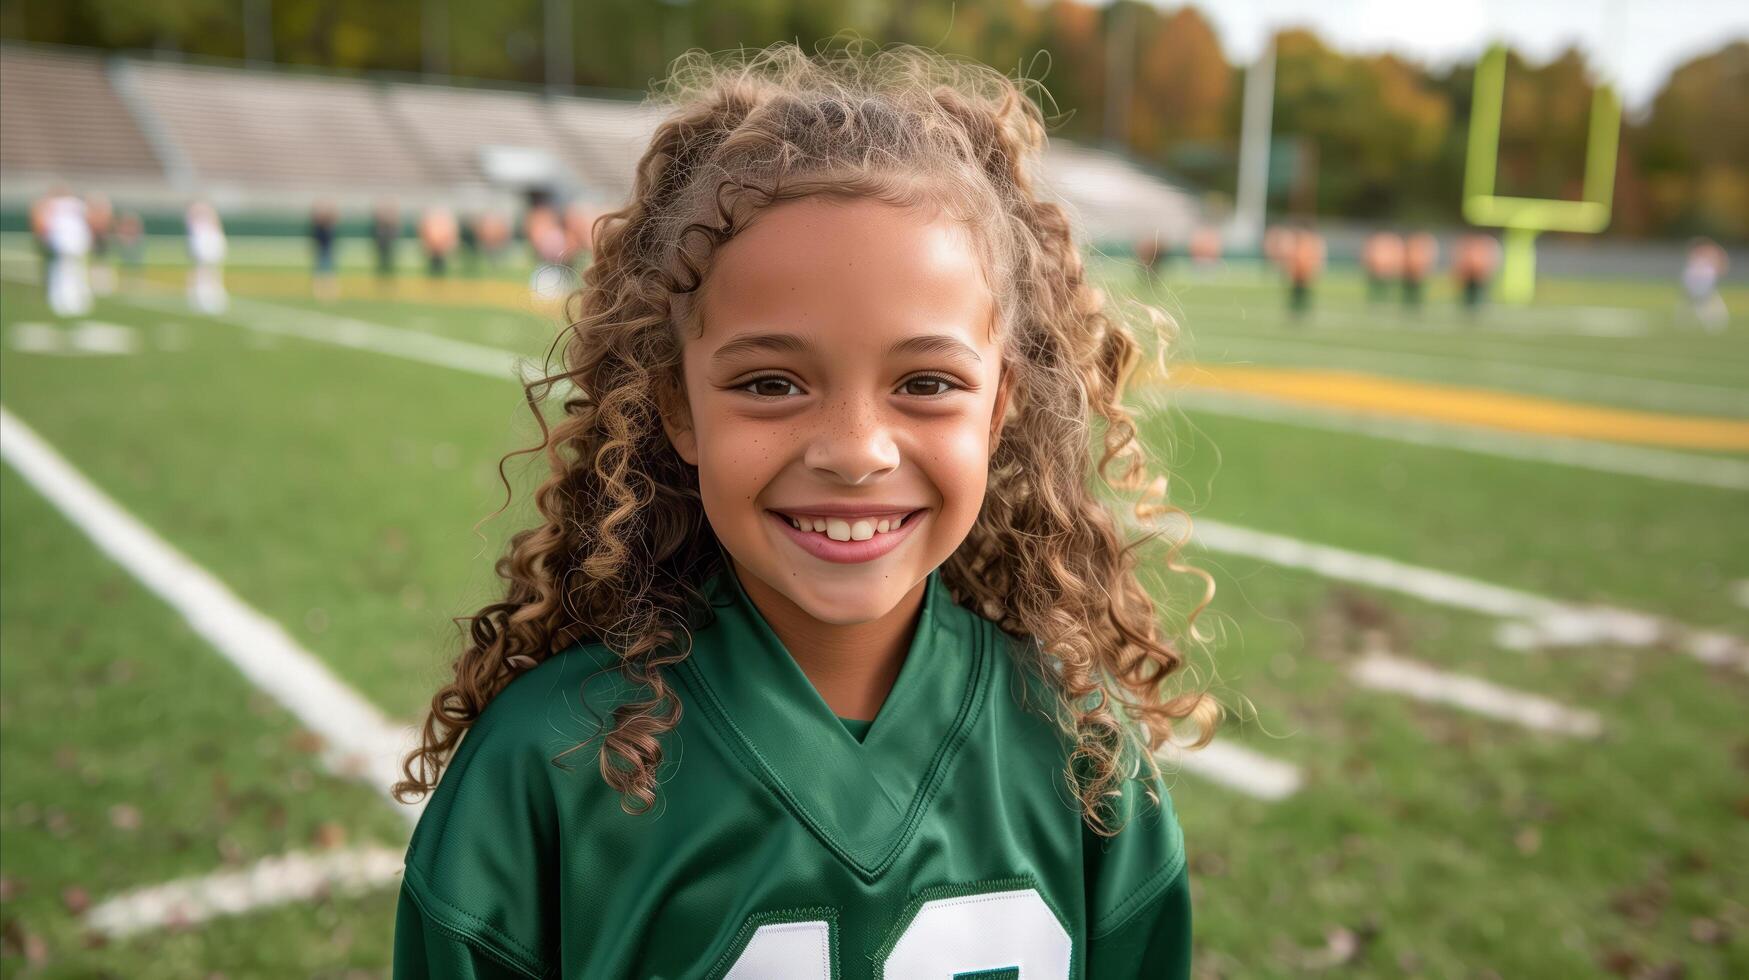 Young Girl Smiling in Football Jersey on Field During Daytime photo